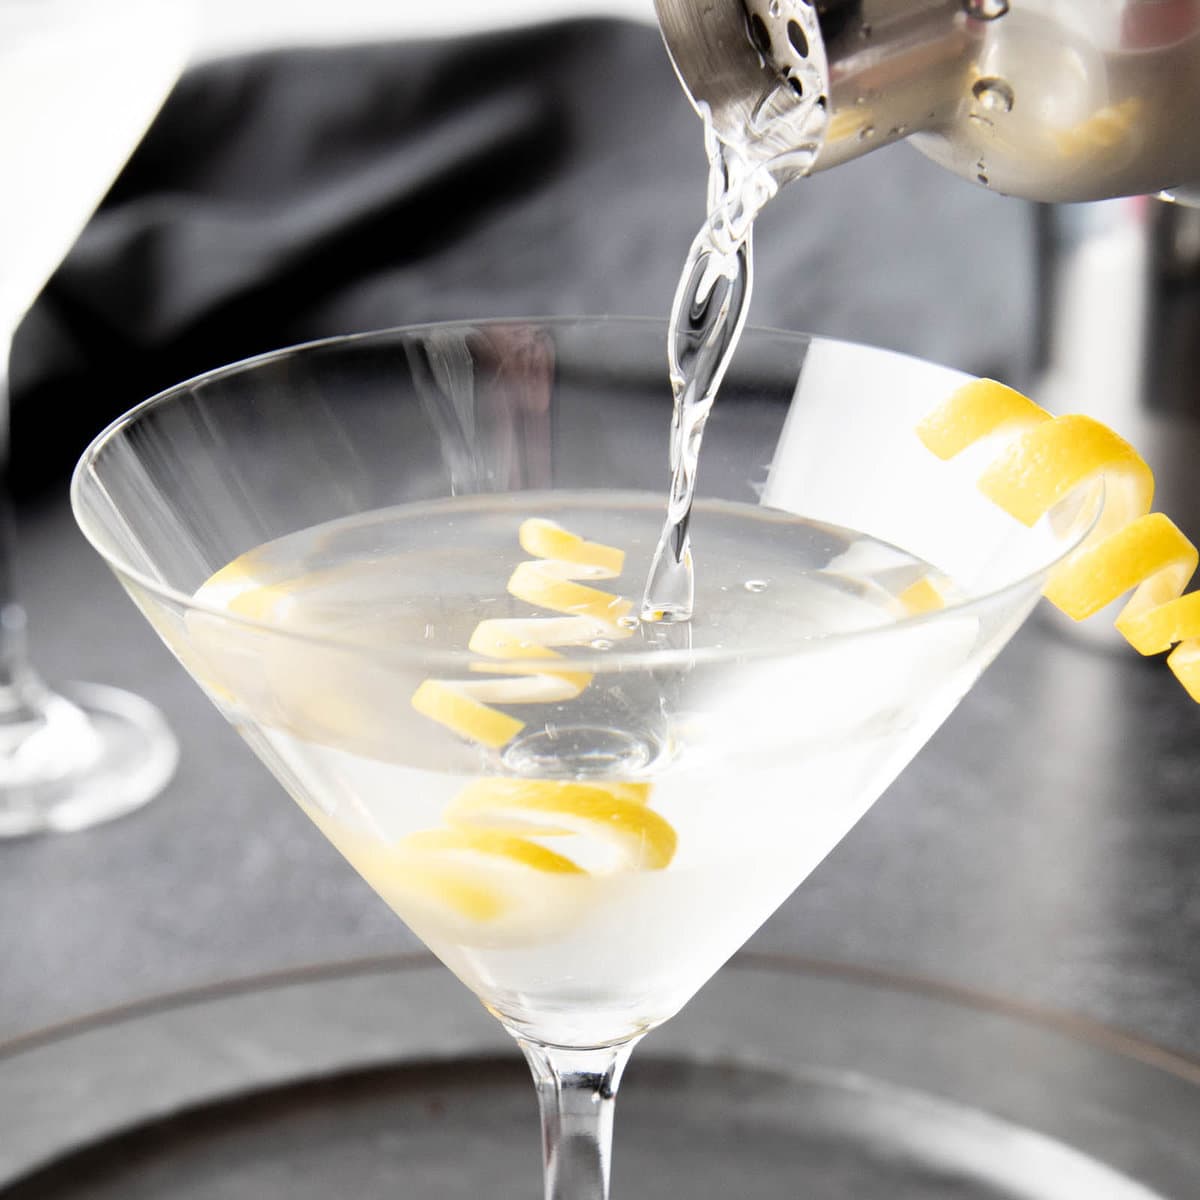 Pouring martini mixture from cocktail shaker into chilled martini glass